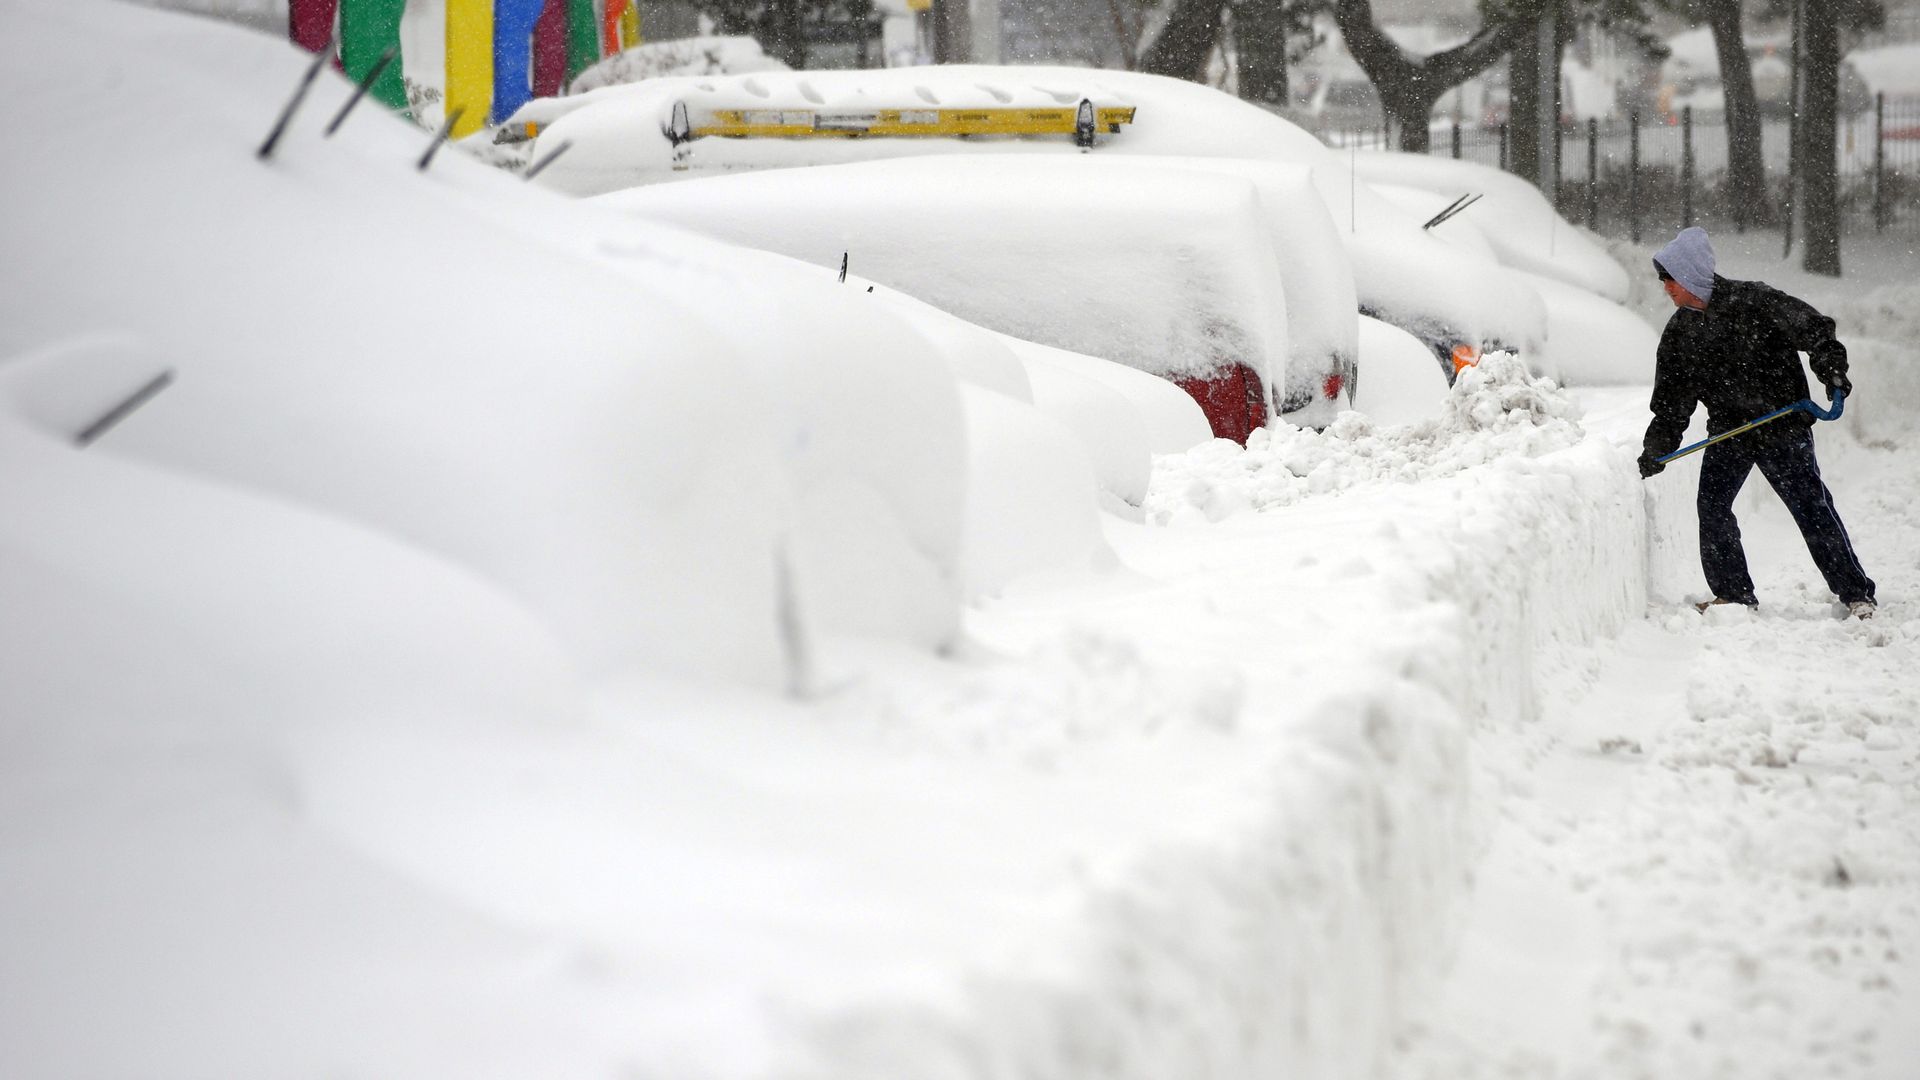 A man digs out cars after a blizzard in February 2010 in Silver Spring, Maryland.